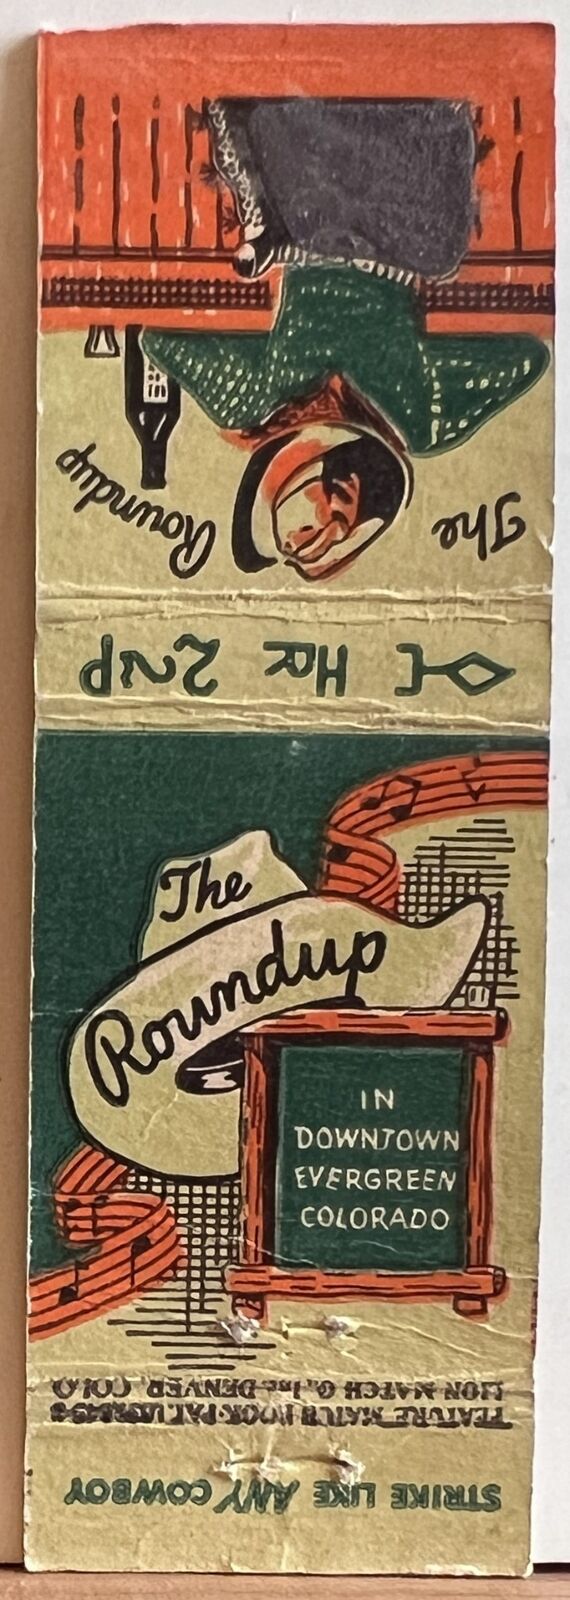 The Roundup Evergreen CO Colorado Vintage Spot Strike Matchbook Cover